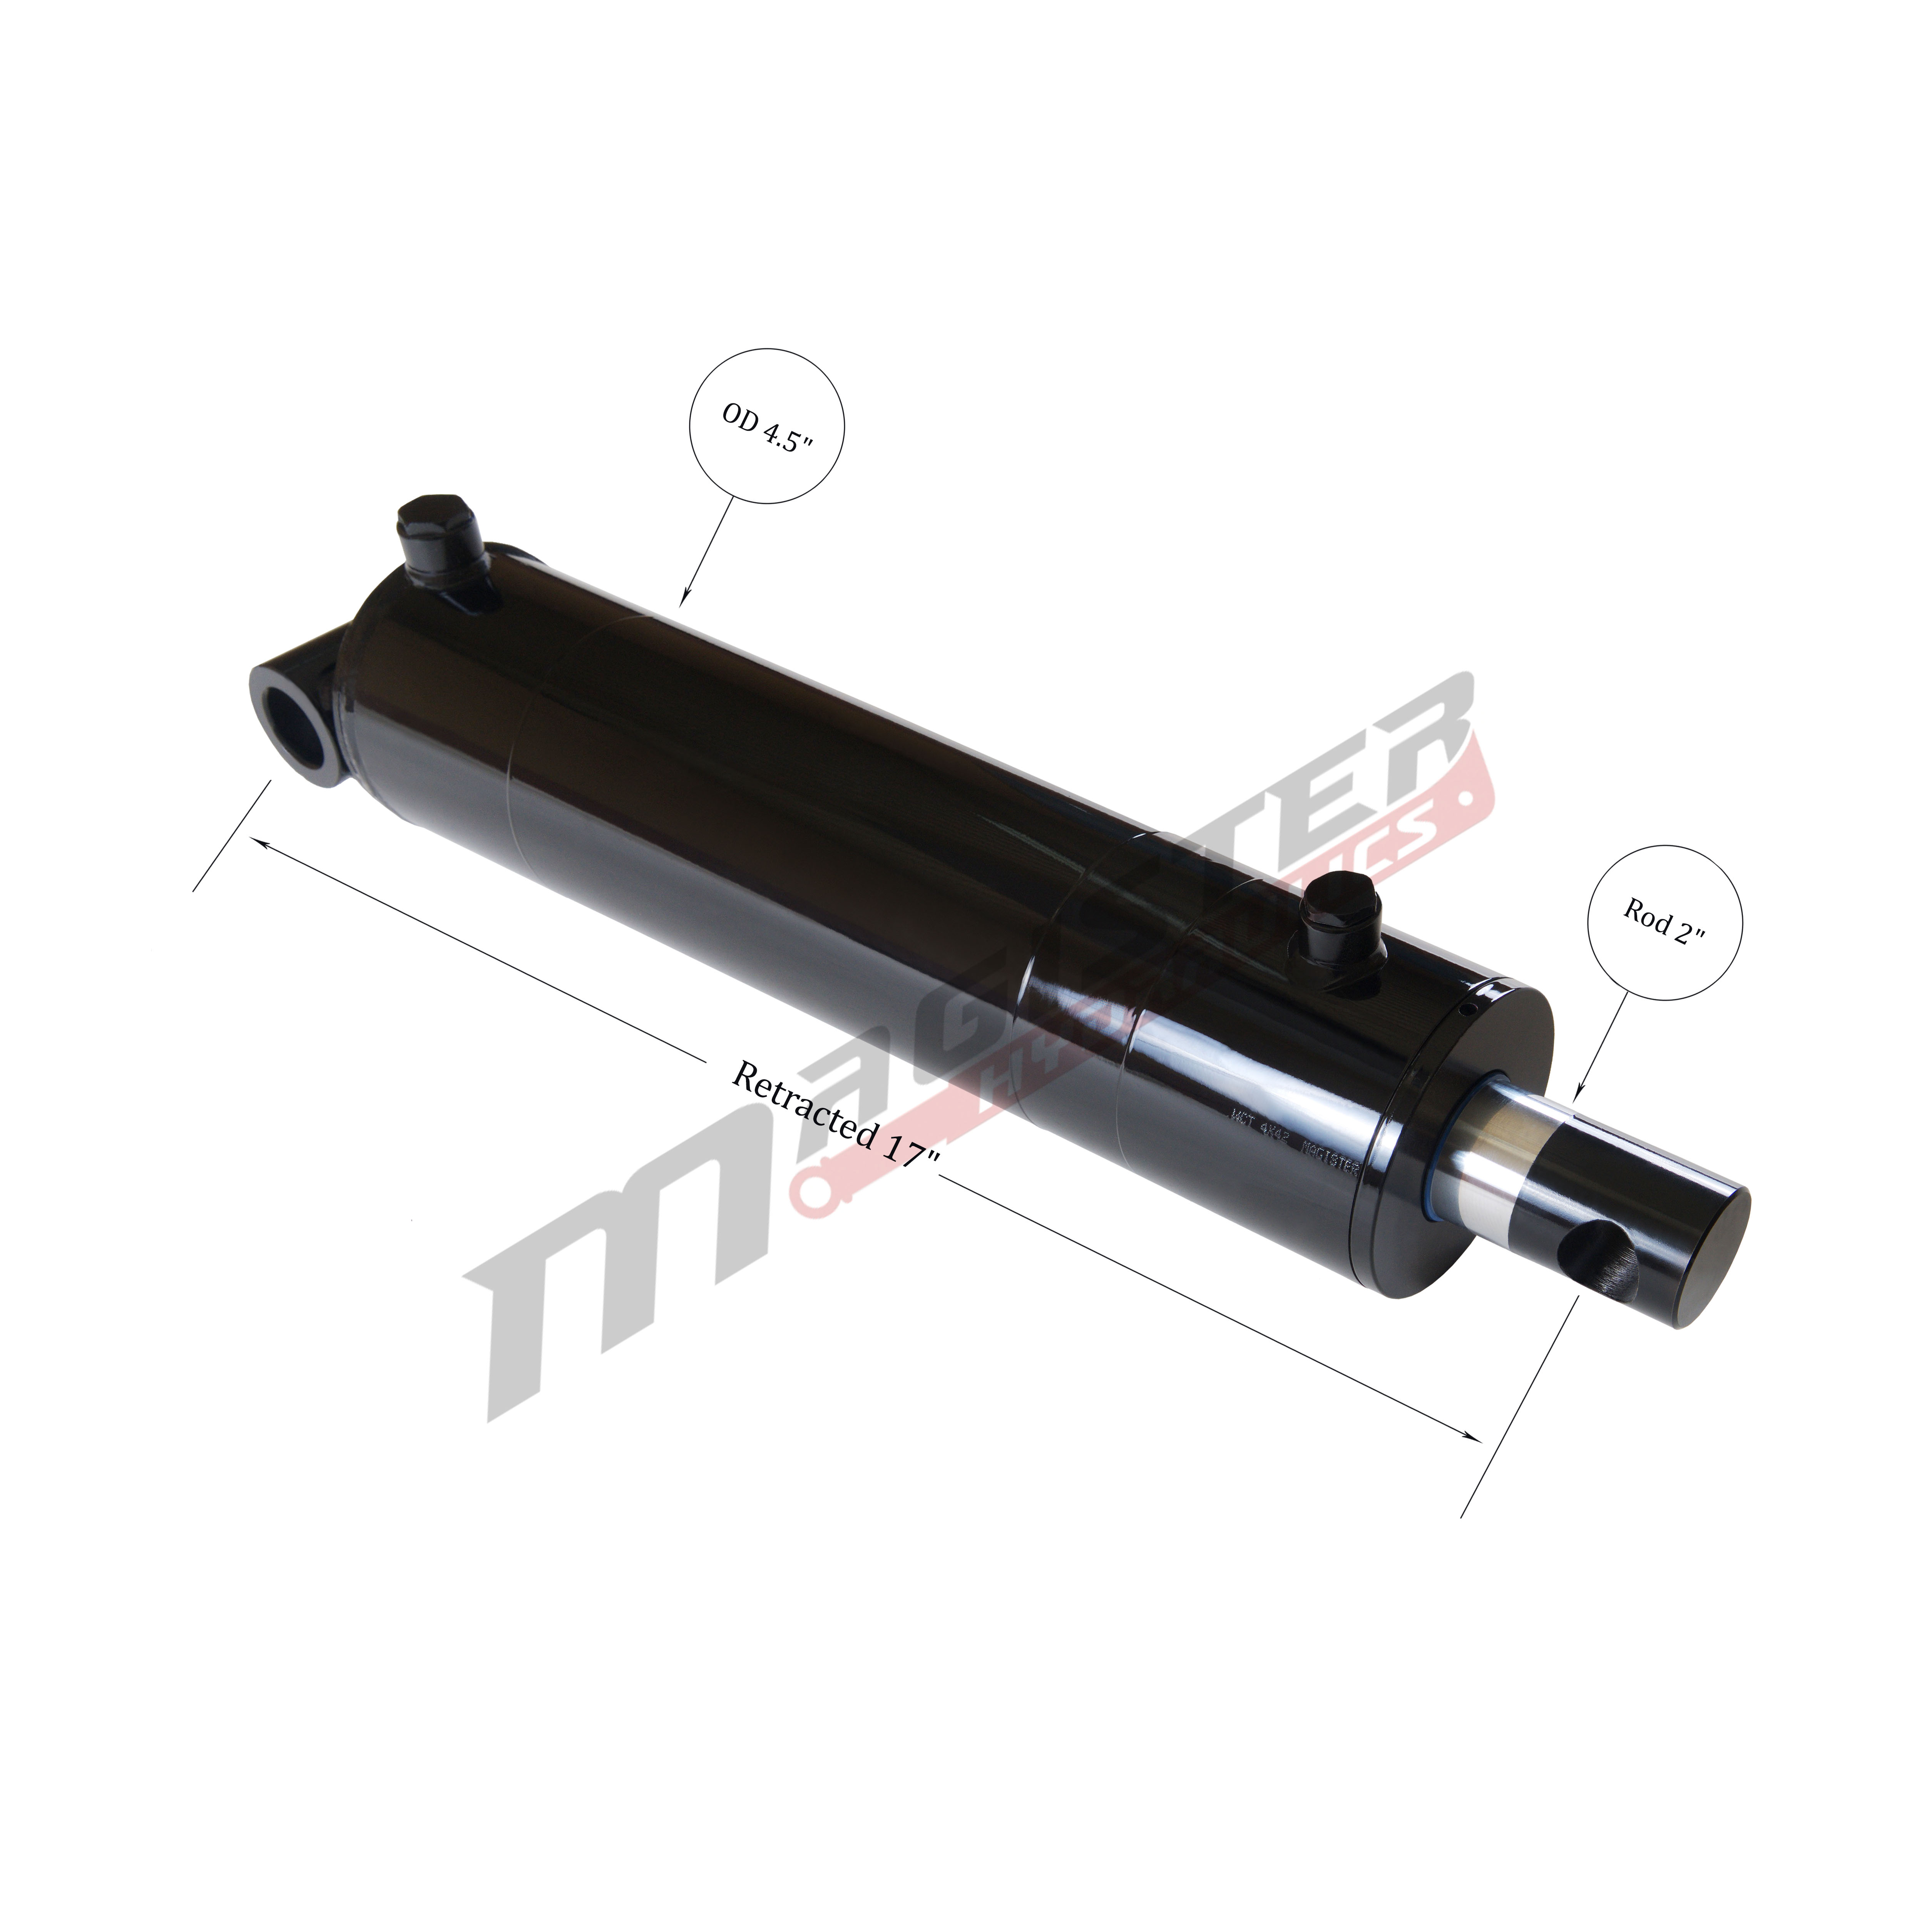 4 bore x 8 stroke hydraulic cylinder, welded pin eye double acting cylinder | Magister Hydraulics